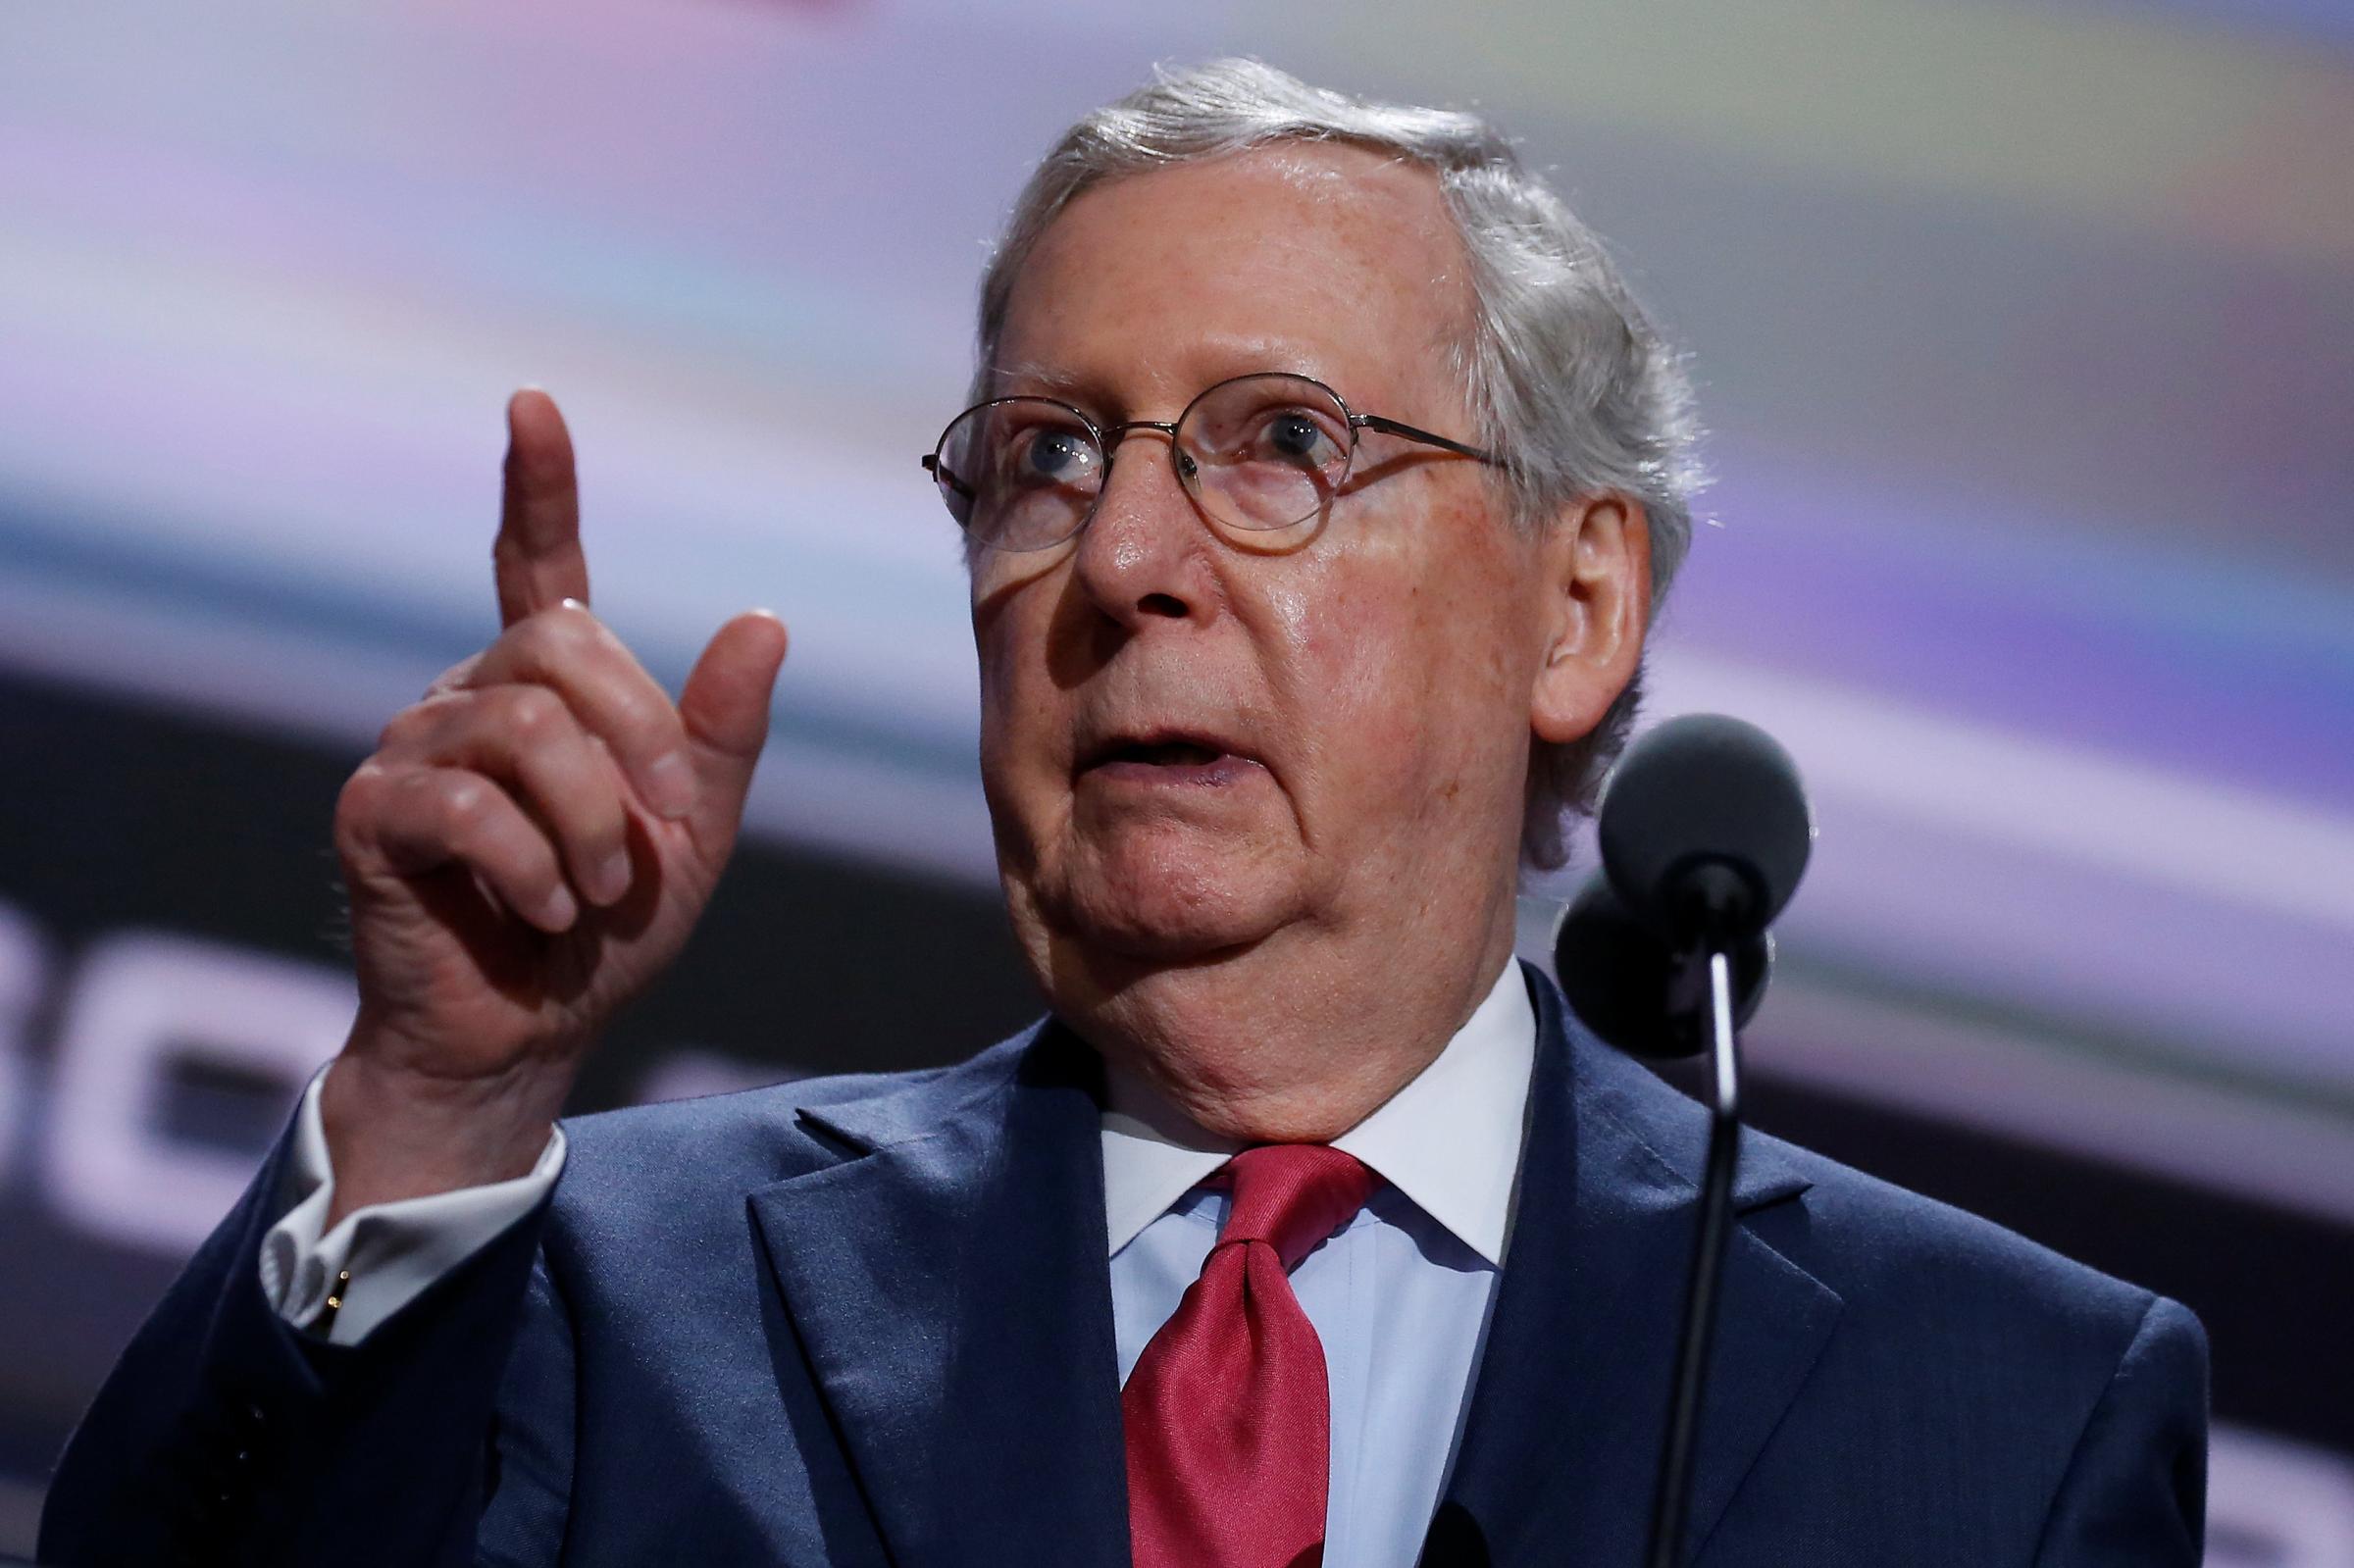 Senator Mitch McConnell prepares to speak at the Republican Convention in Cleveland, July 19, 2016.